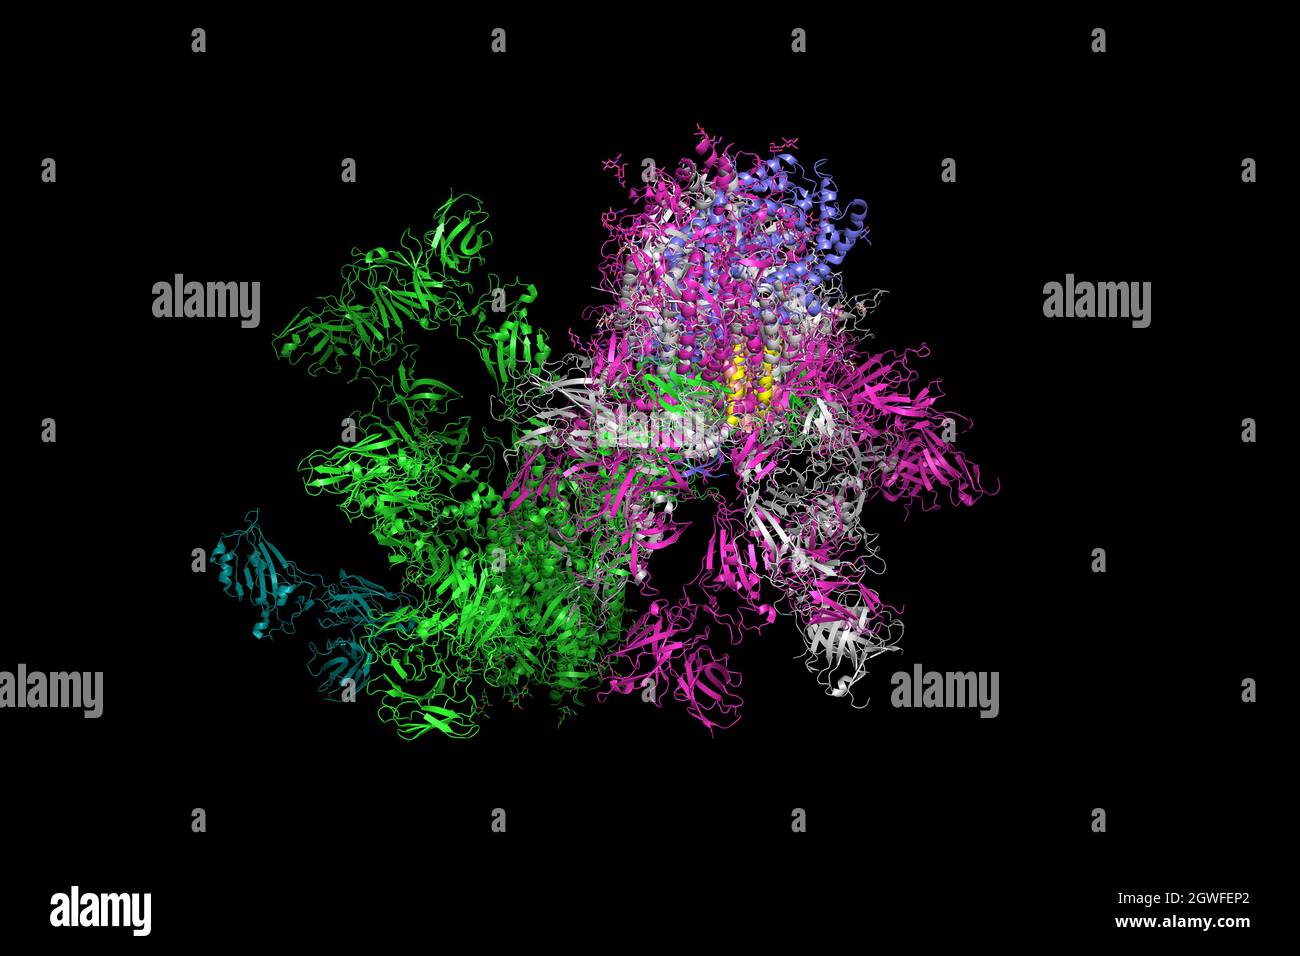 SARS-CoV-2 Spike Glycoprotein. The structure of the complex with protein S, which forms the 'crown' of the coronavirus, 3d rendering. Stock Photo